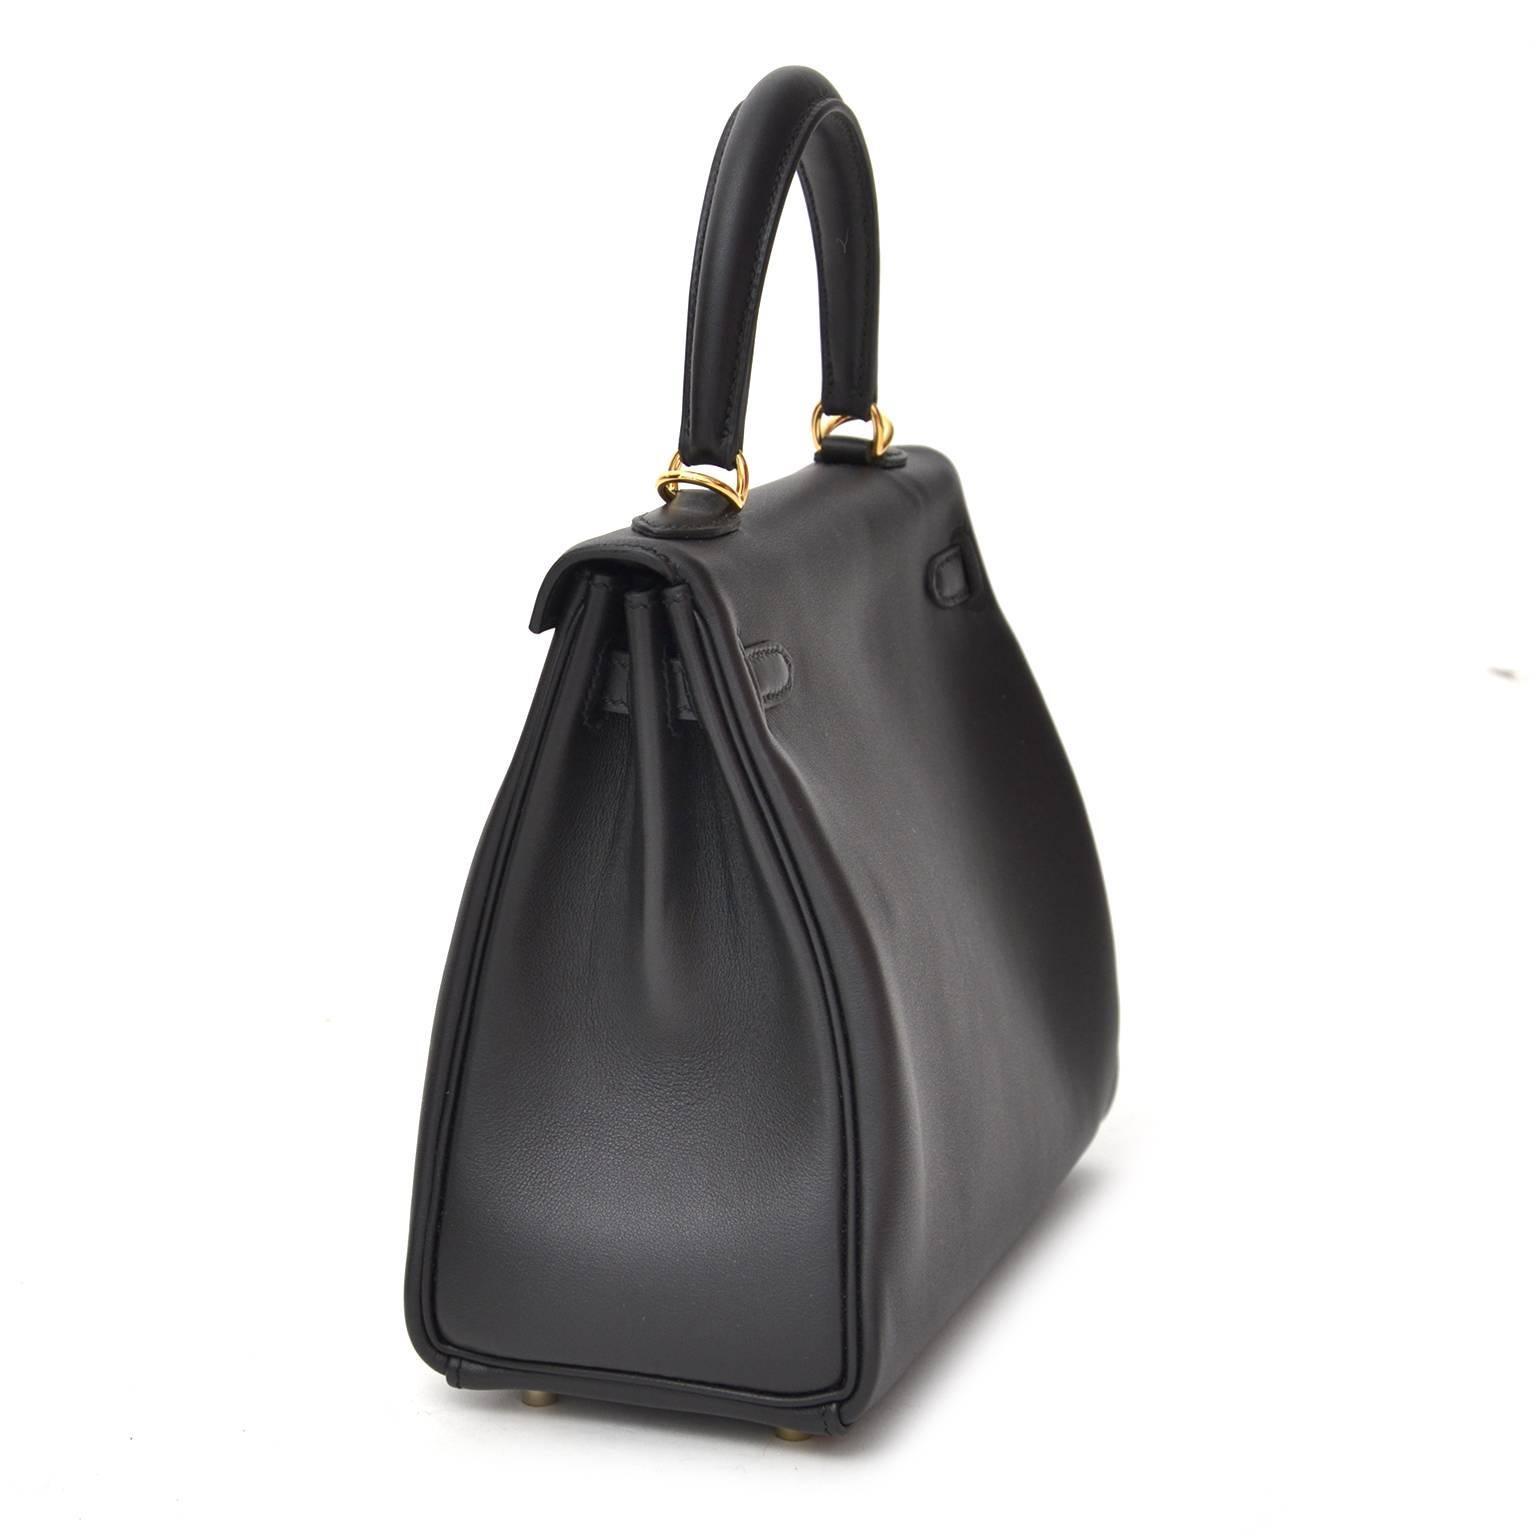 Very Rare Brand New Hermes Kelly 25 Retourne Veau Swift Noir Black and gold tone hardware. Retourne is know for its more structured shape with rigid corners and exterior stitching with no visible piping. The result is a stiffer, sharp edge